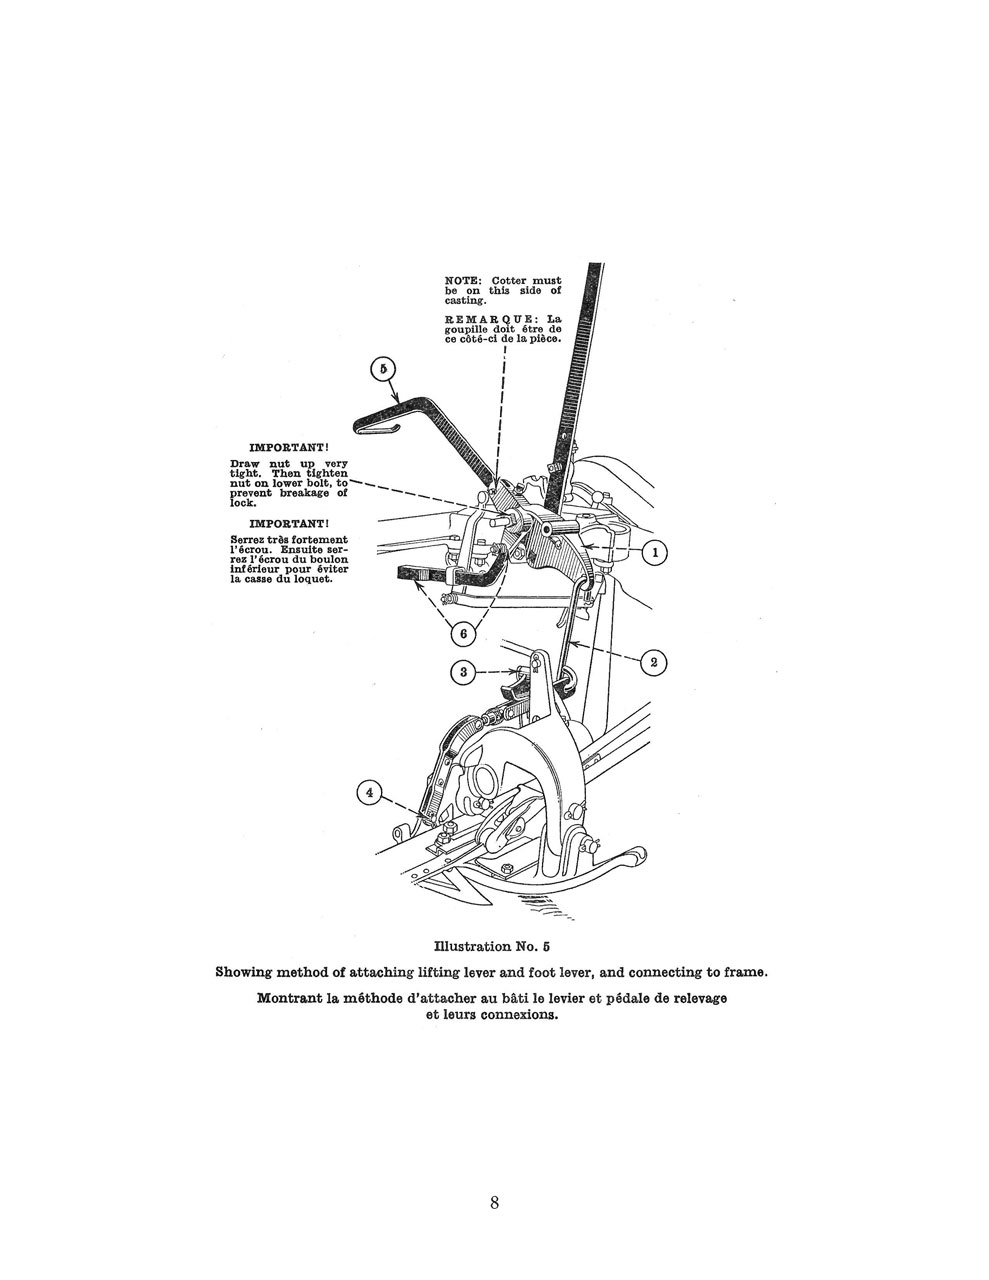 McCormick-Deering No 7 Mower Manual in English & French